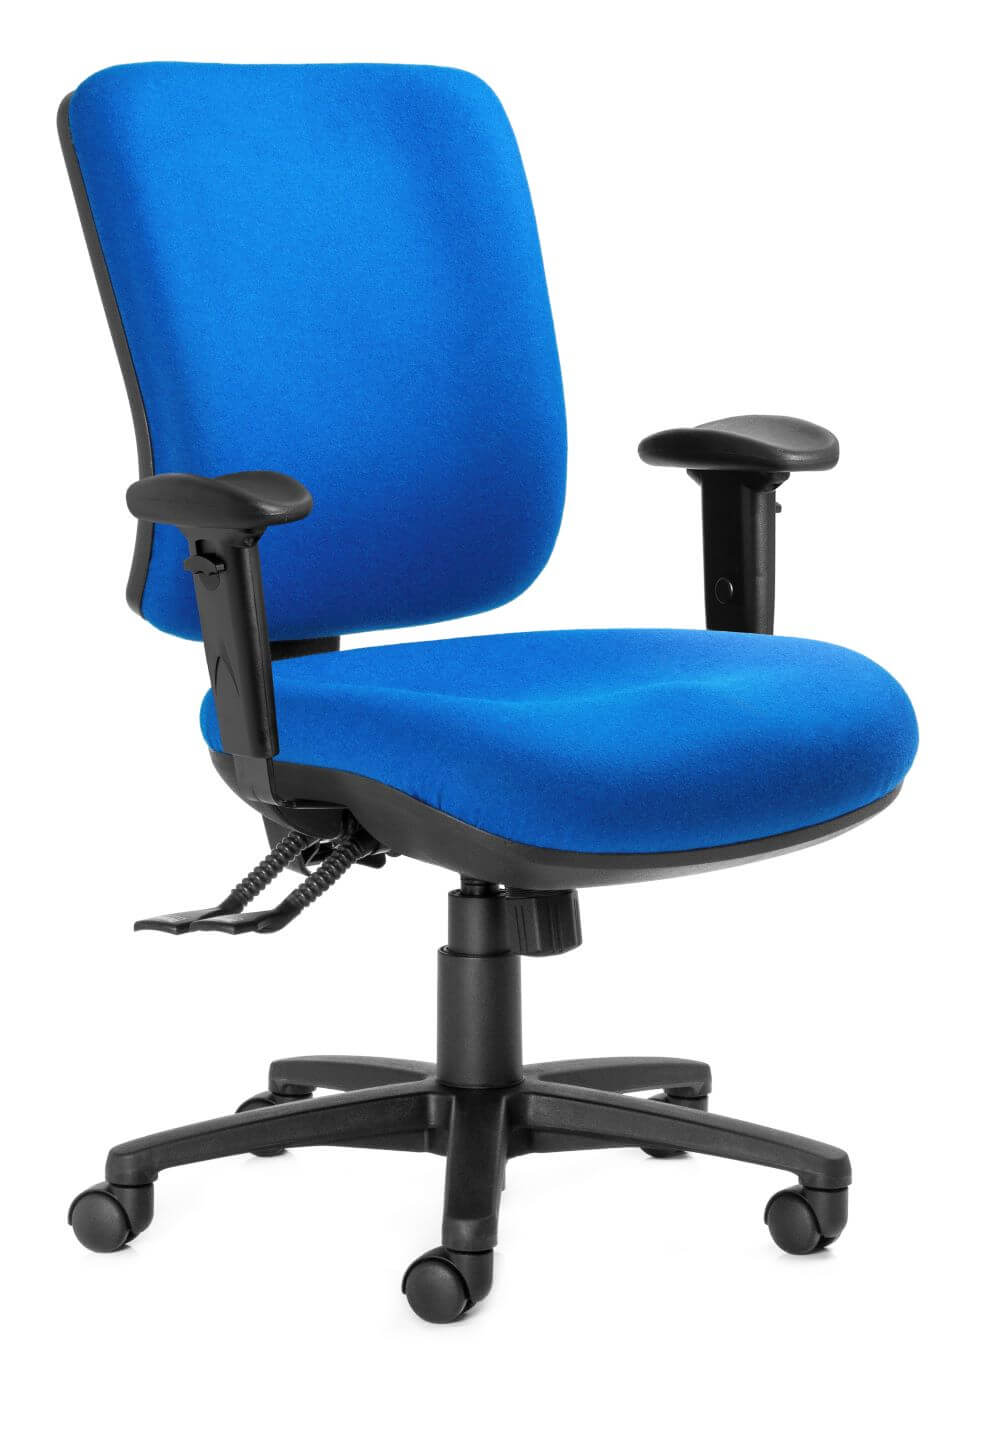 Rexa high back in blue with black arm rests and black 5 star base on castors